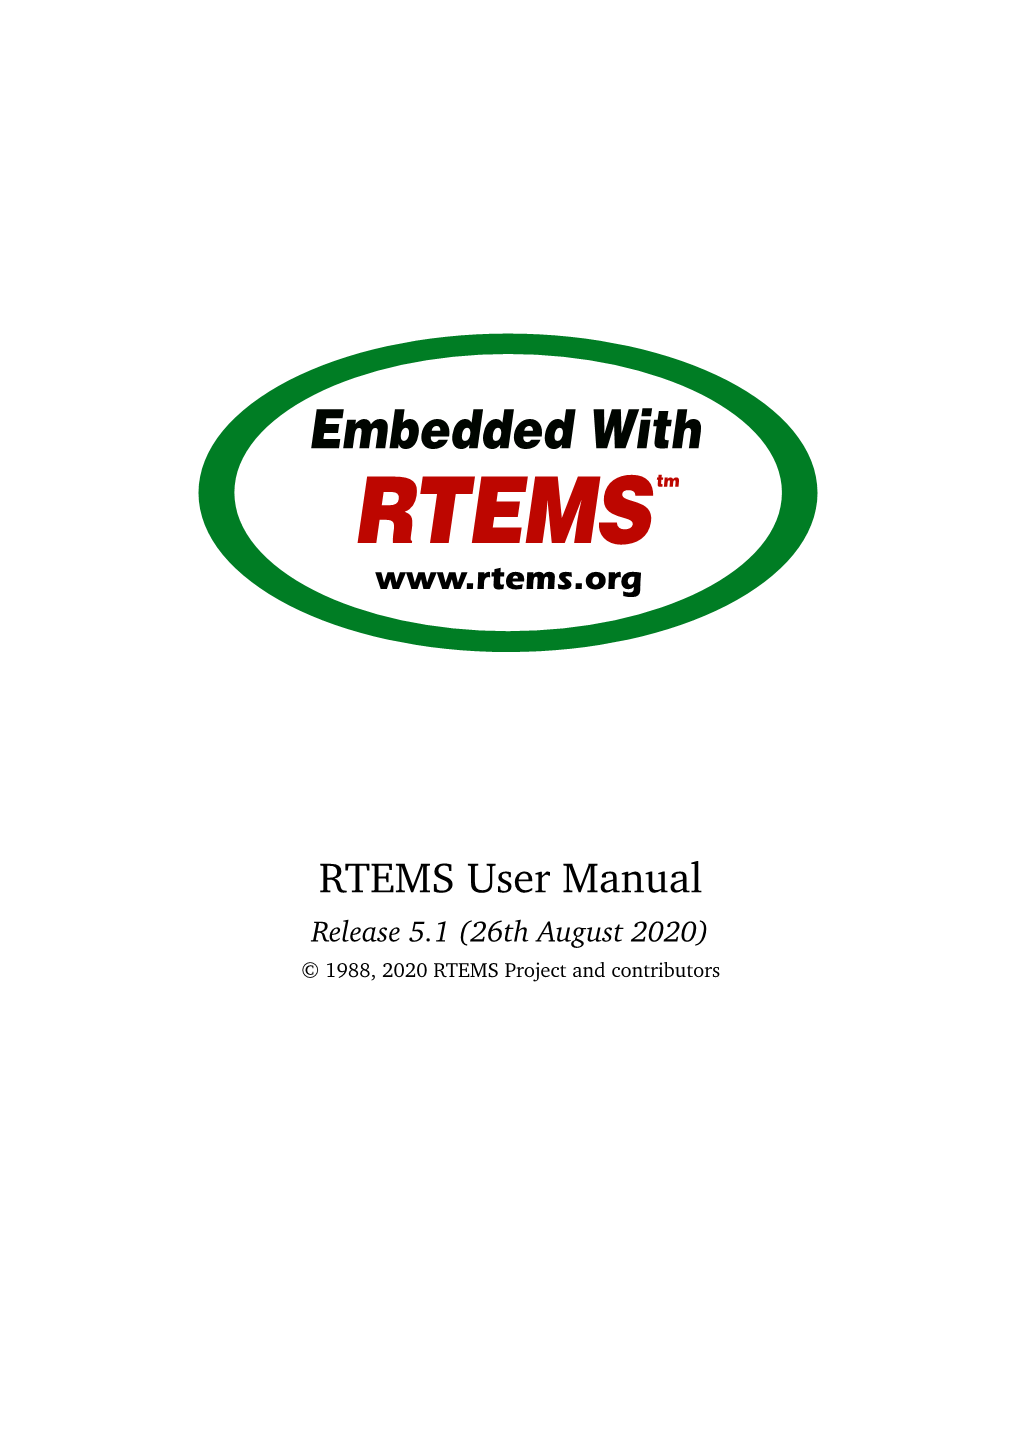 RTEMS User Manual Release 5.1 (26Th August 2020) © 1988, 2020 RTEMS Project and Contributors